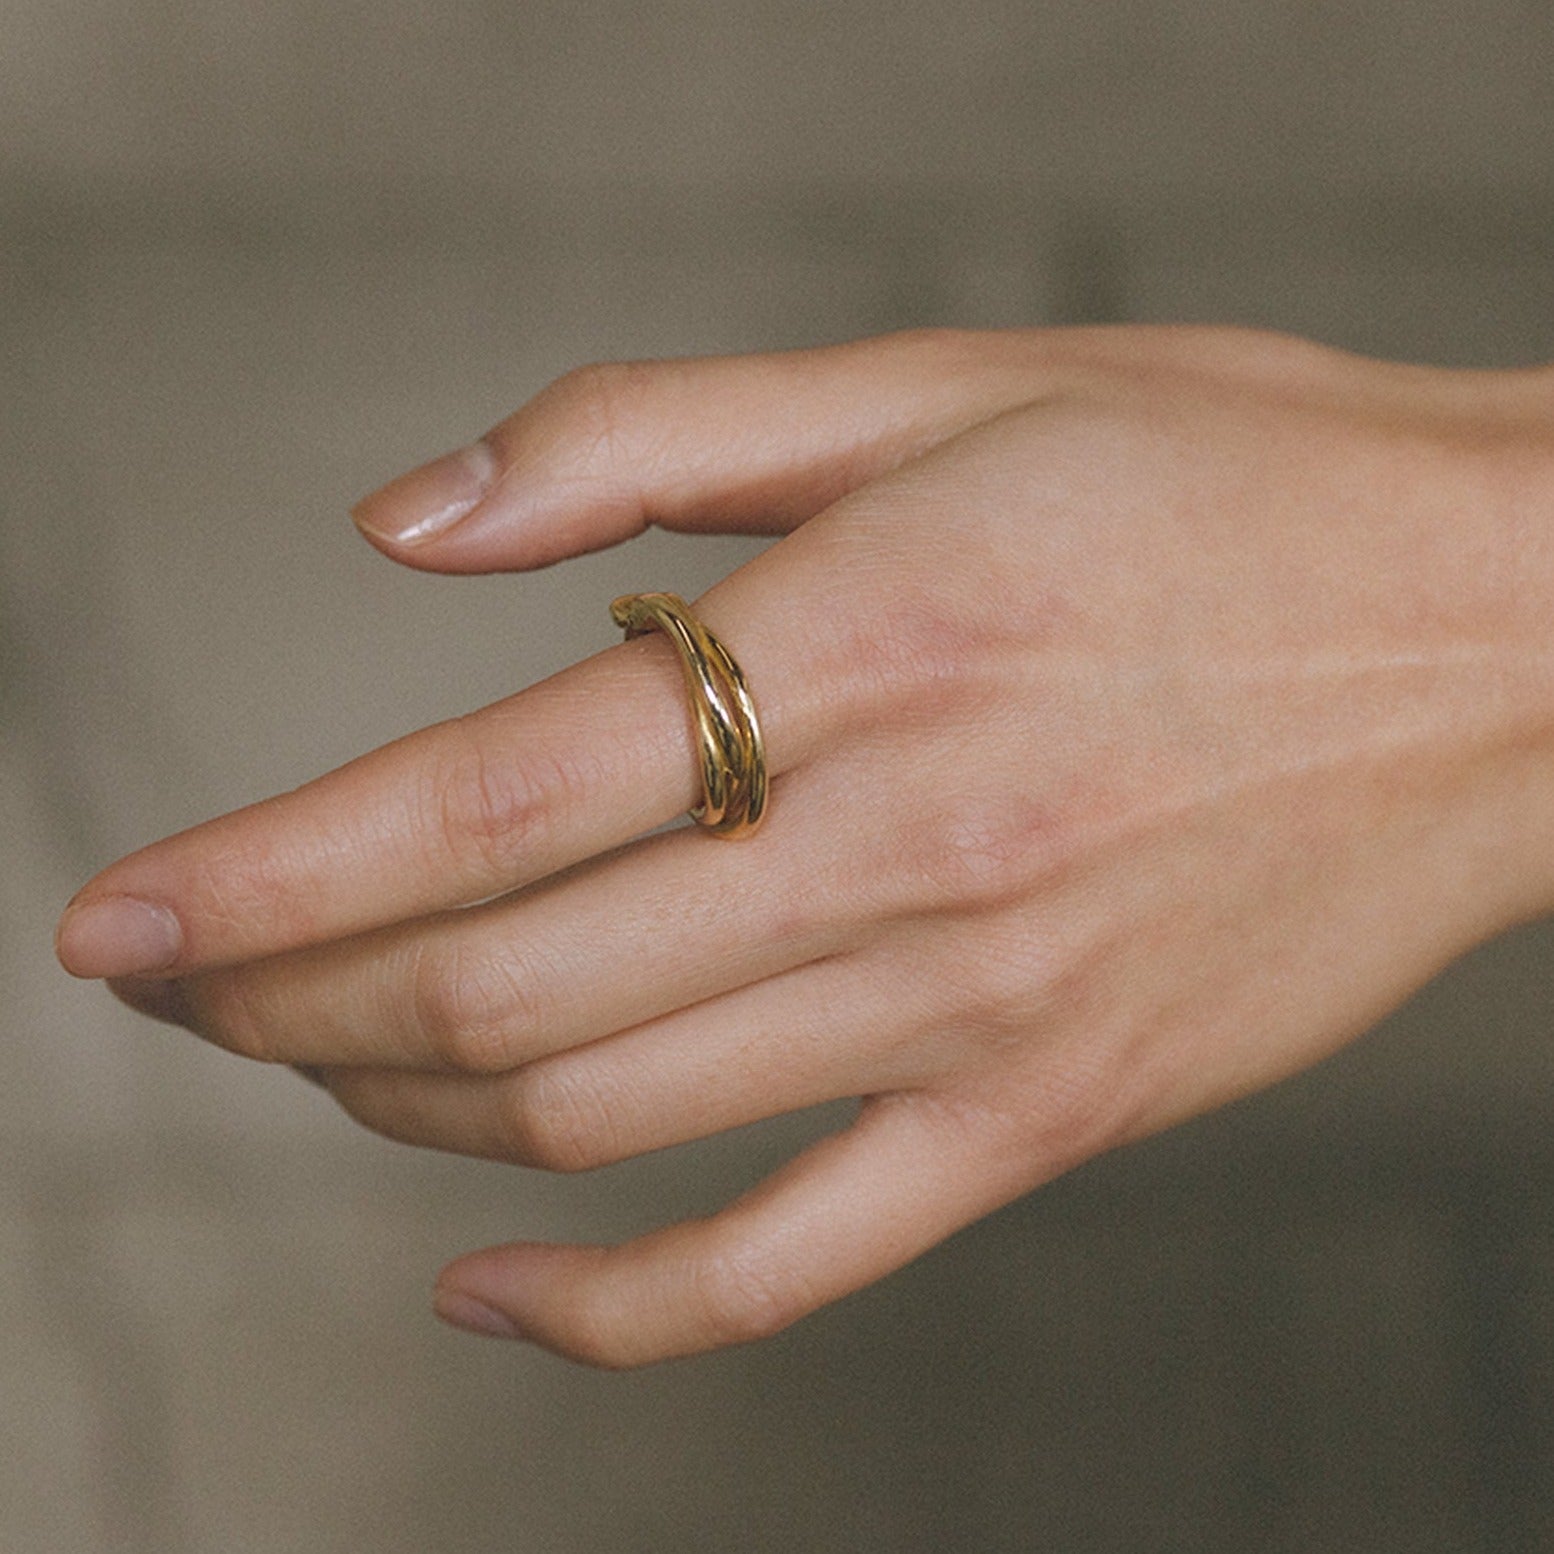 Faris bronze Tangle Ring on hand. Available at FAWN Toronto.